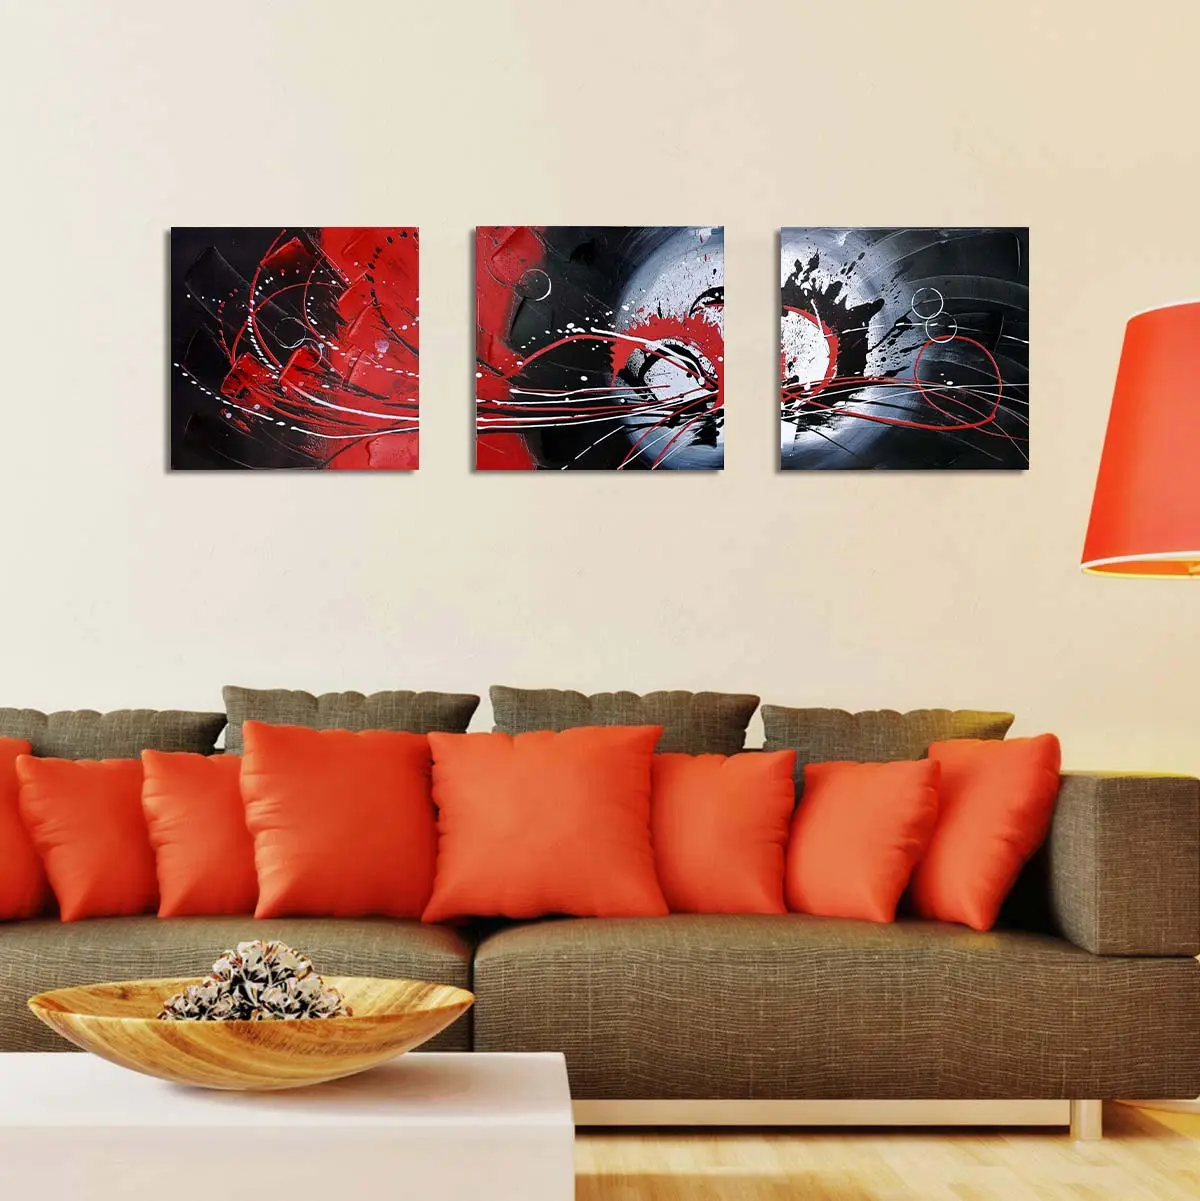 Popular Modern Abstract Art Red And Black Canvas Painting Artwork Personality Wall Art Painting For Home Decoration